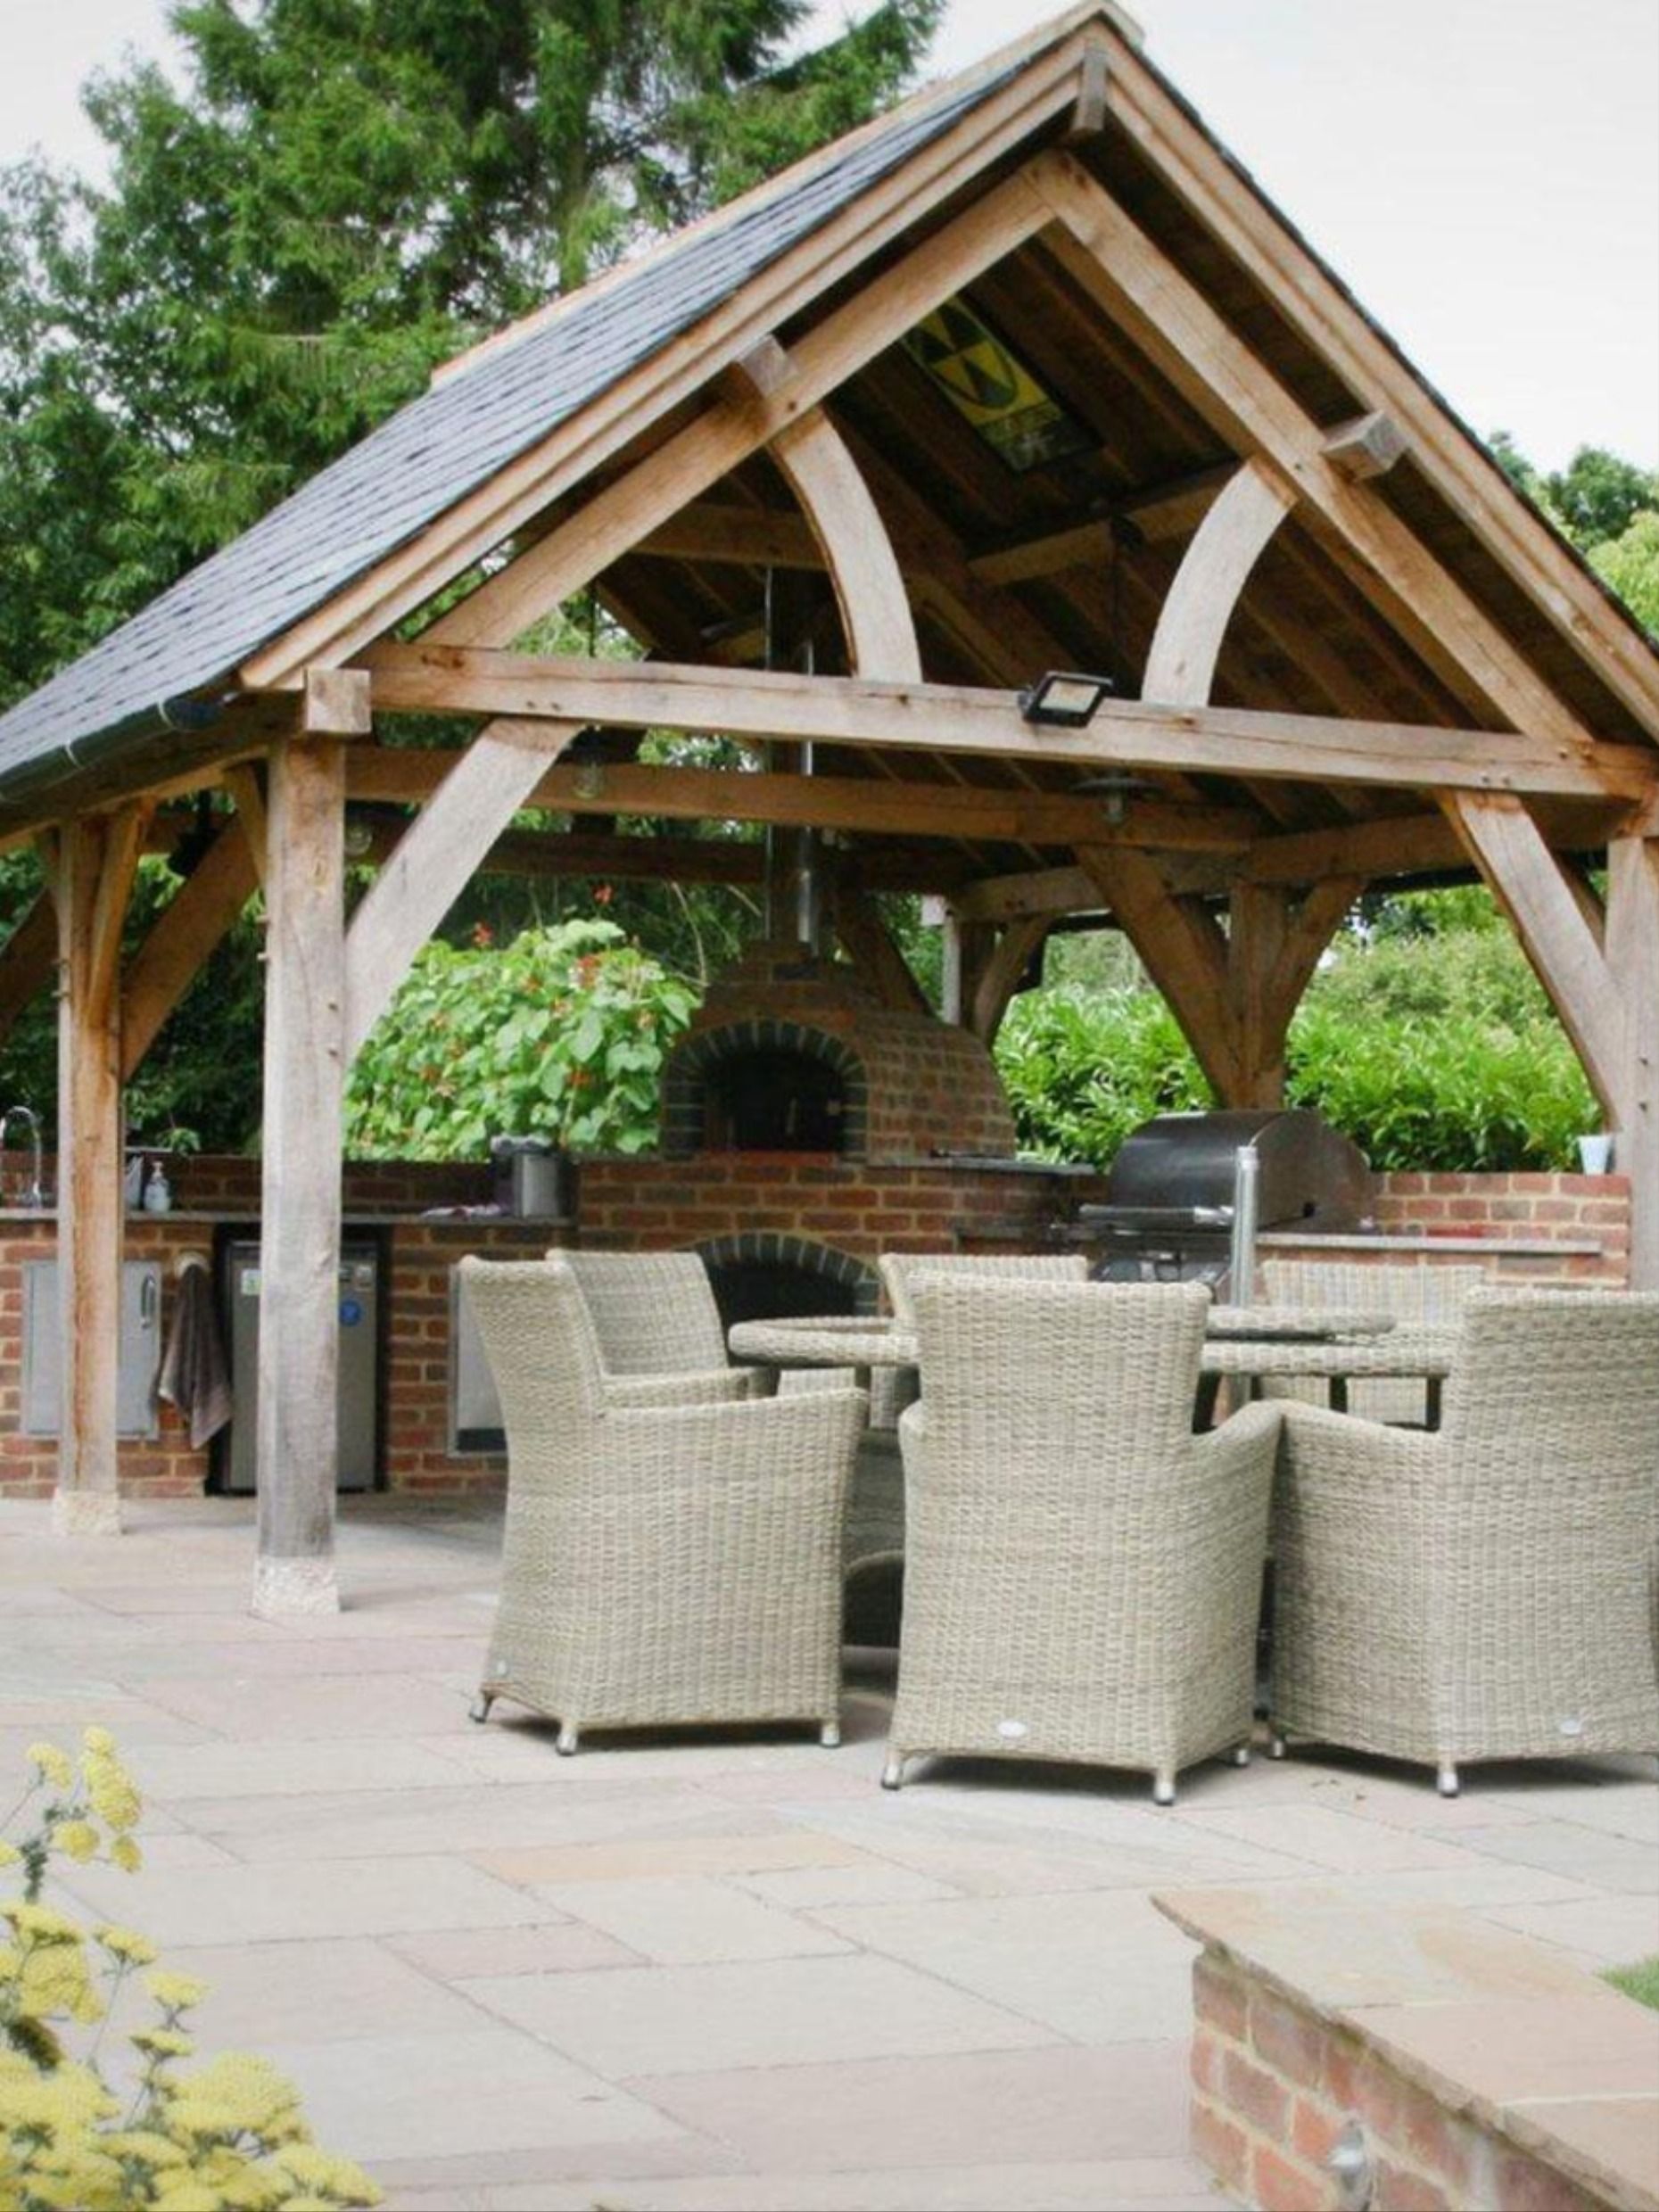 Beautiful Wooden Gazebo: A Charming Addition to any Outdoor Space